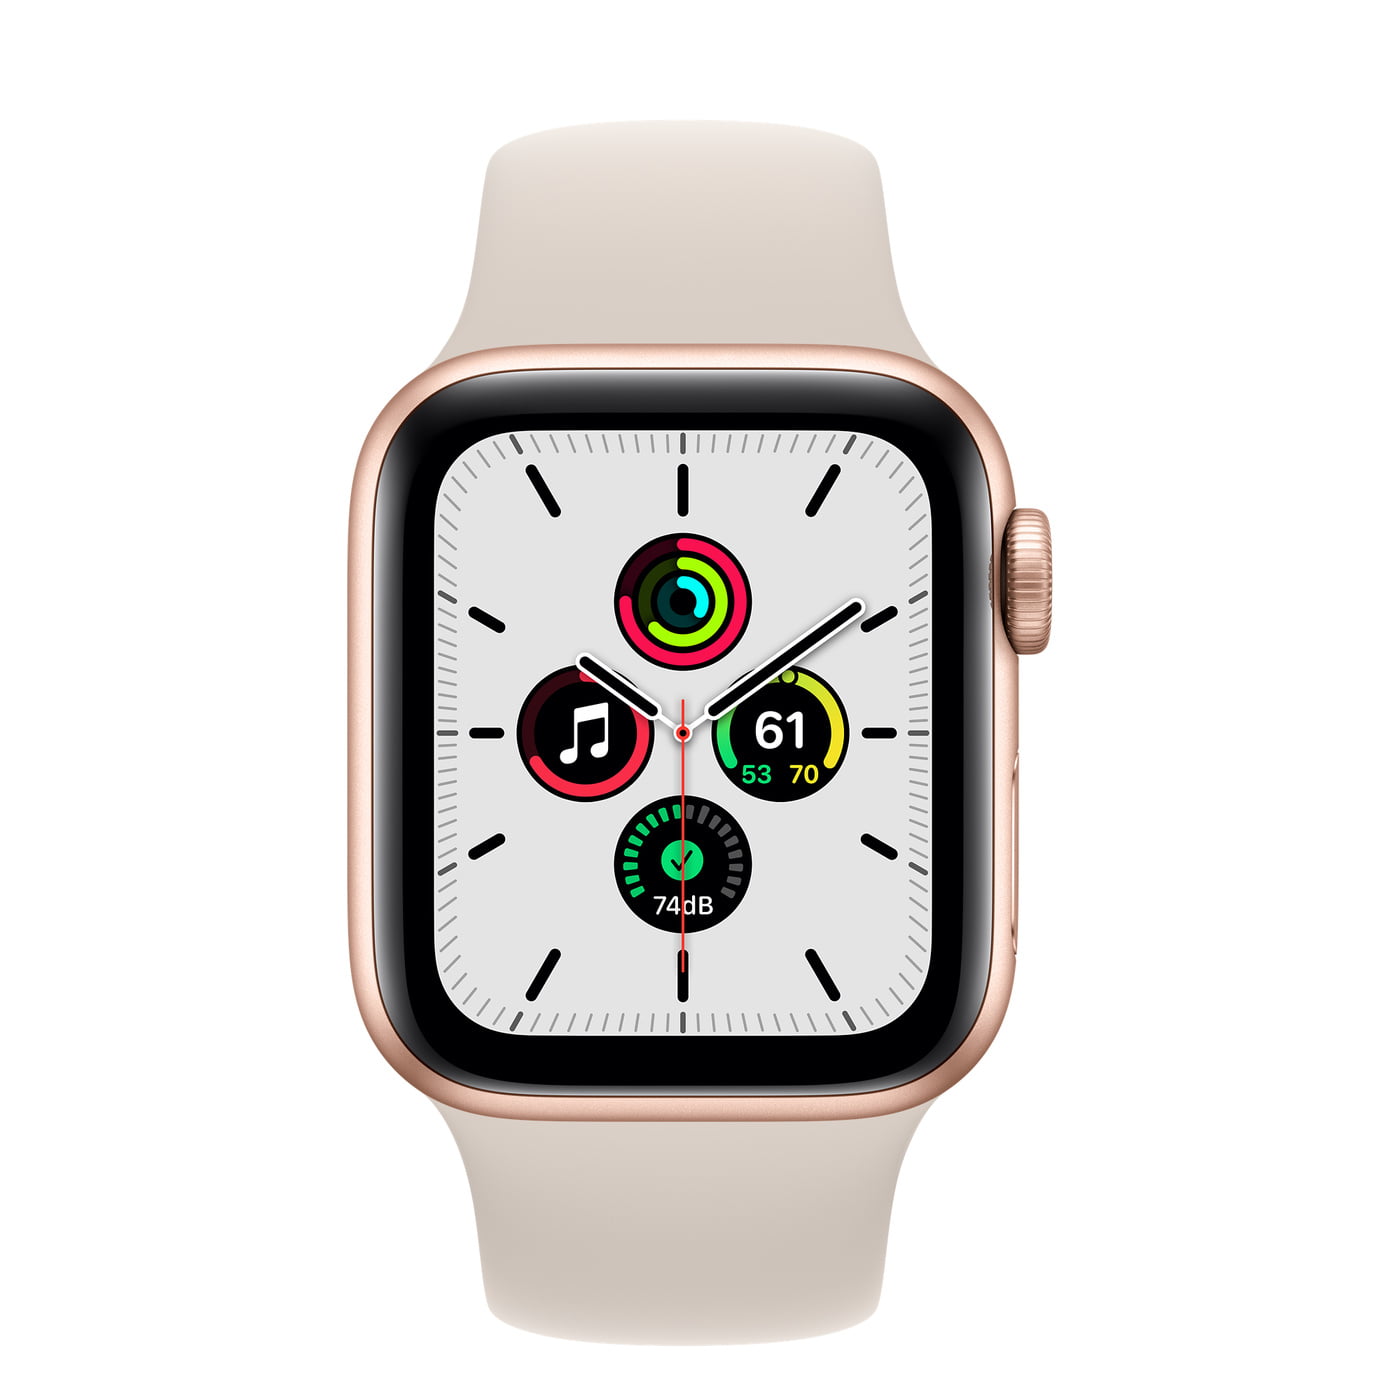 Apple watch SE GPS 40 mm for $219.00, 44mm for $249.00 all colors available